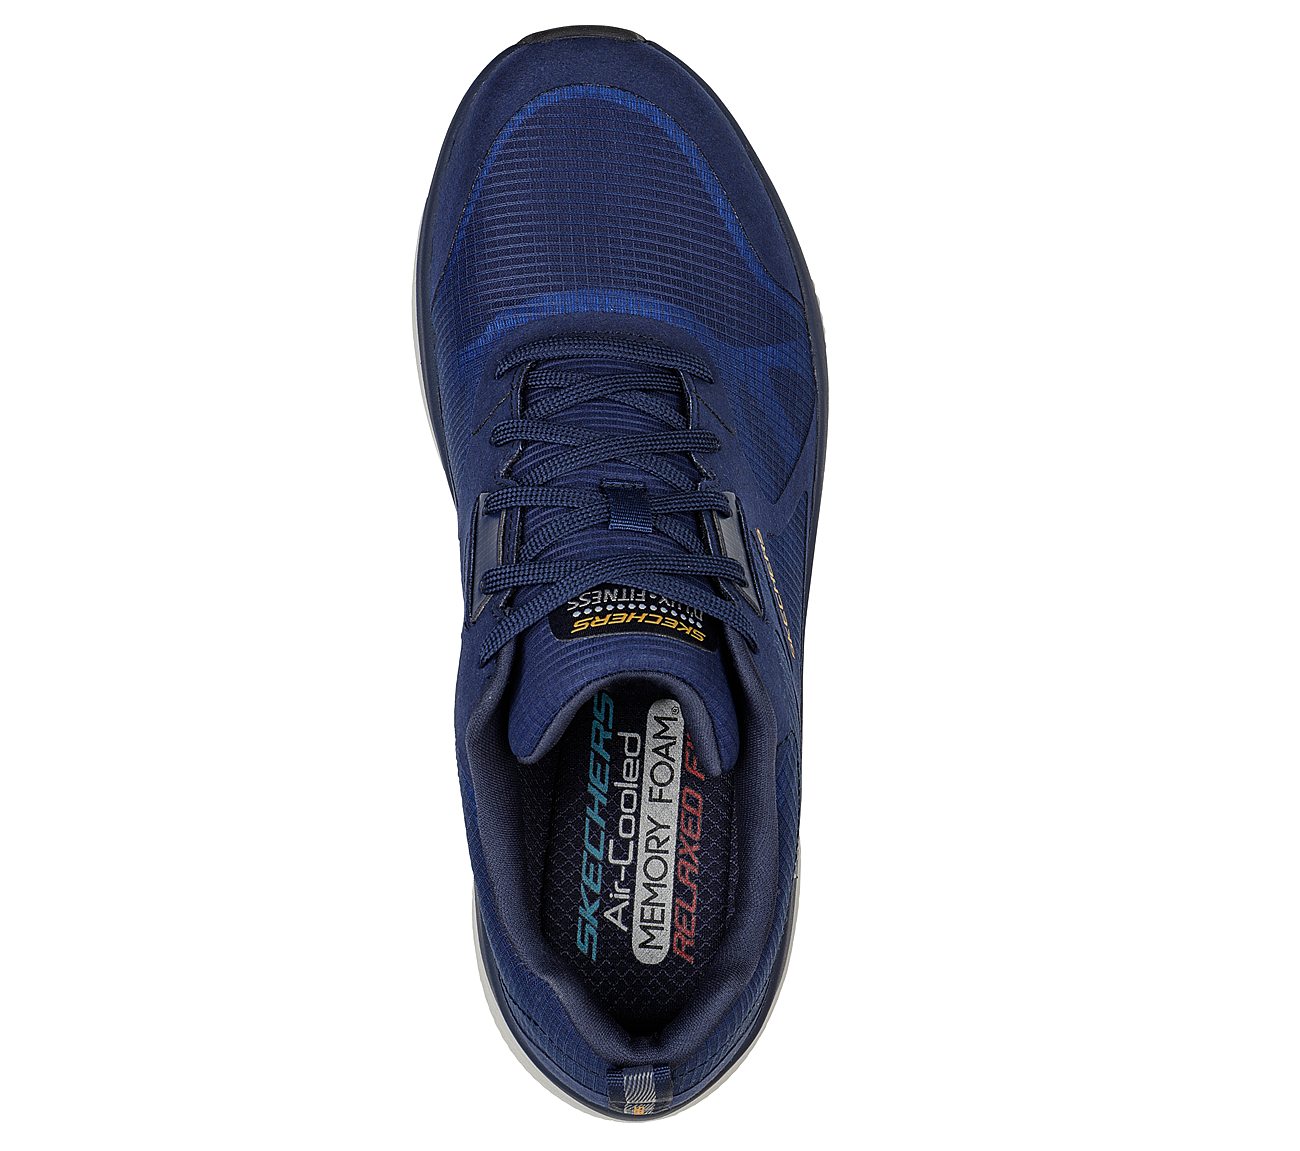  D'LUX FITNESS-BOX JUMP, NAVY/BLUE Footwear Top View